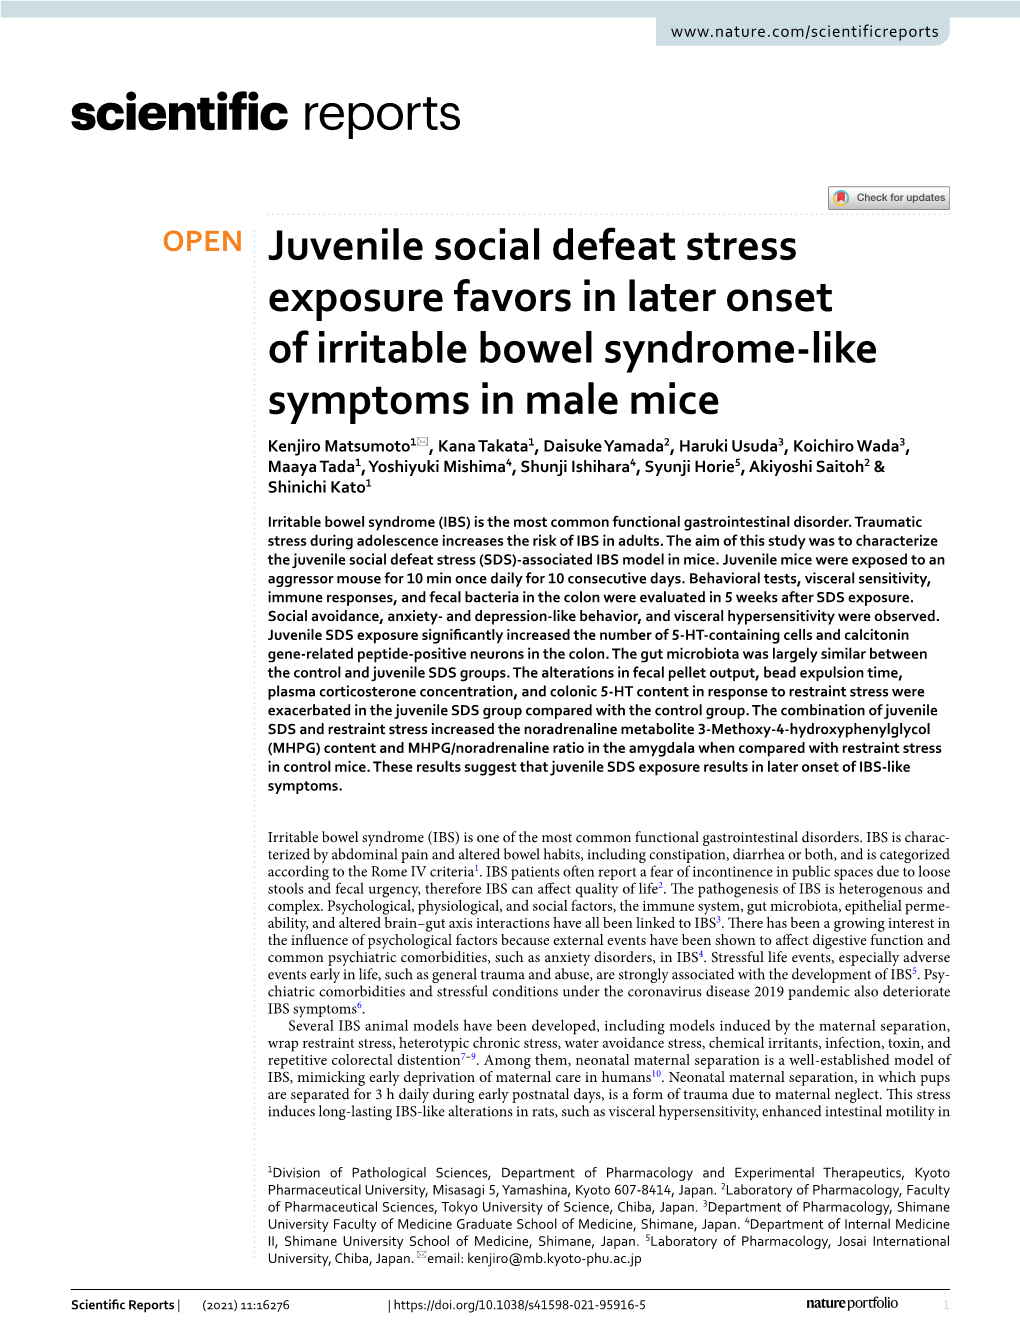 Juvenile Social Defeat Stress Exposure Favors in Later Onset of Irritable